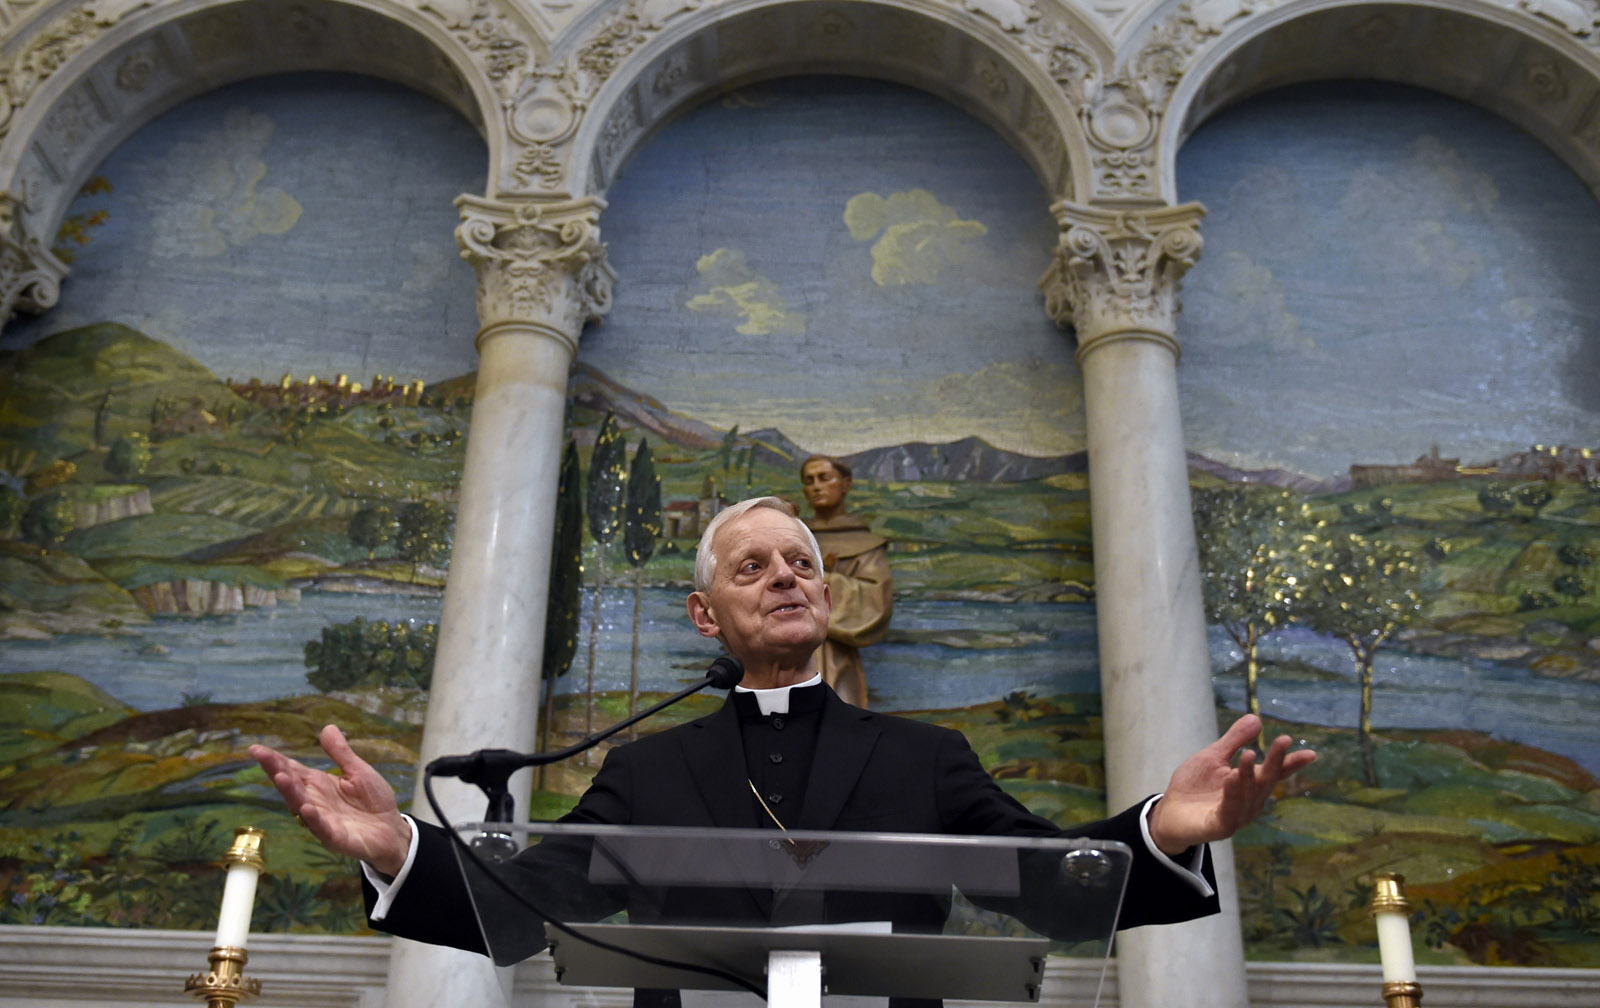 Archbishop discusses pope’s upcoming visit to D.C.